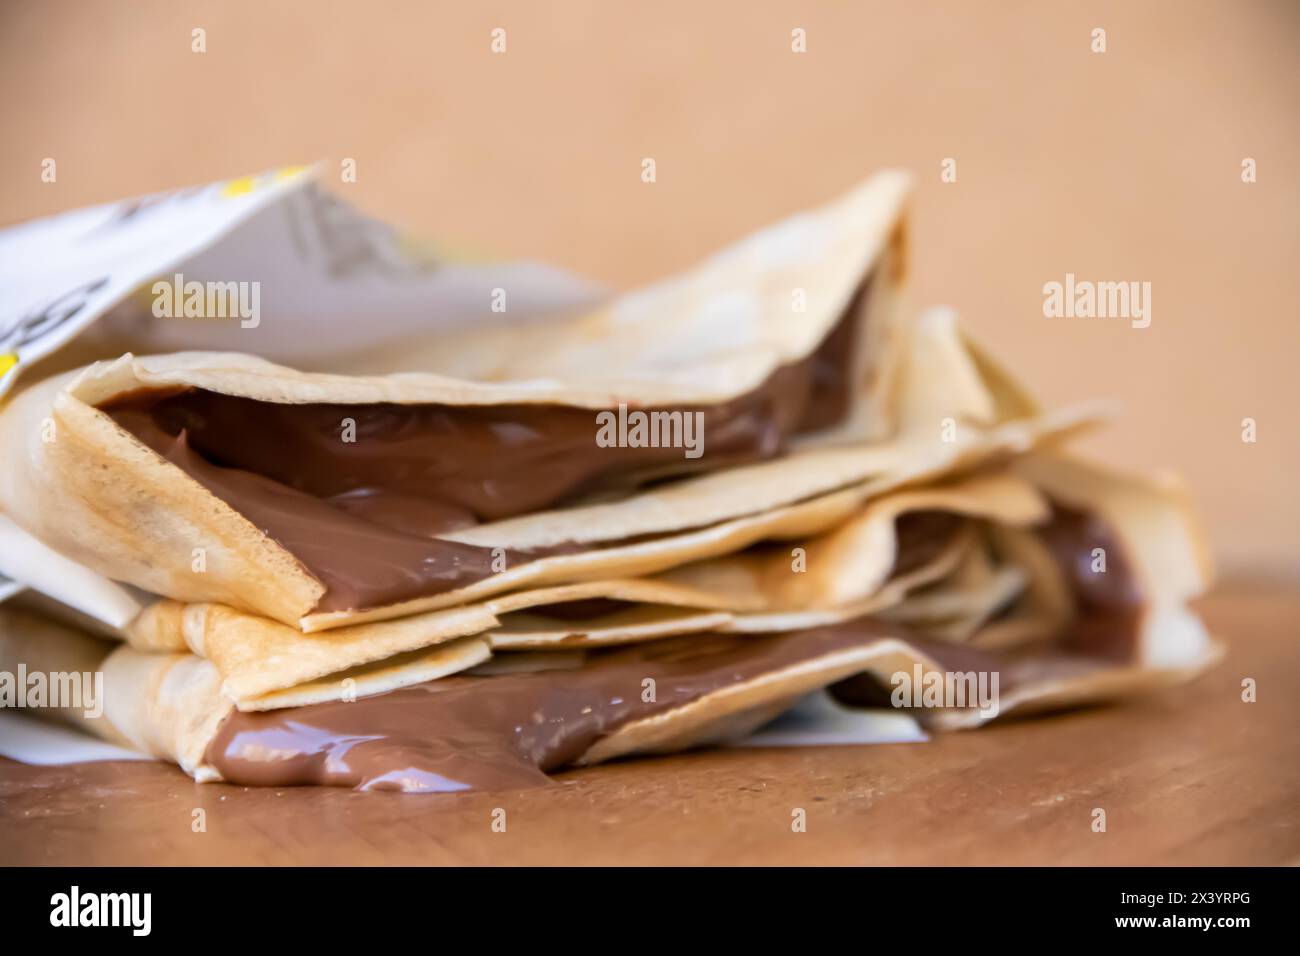 Bunch of home made pancakes filled with dripping melted hot chocolate, chocolate drips down the wooden table out of the pancakes Stock Photo